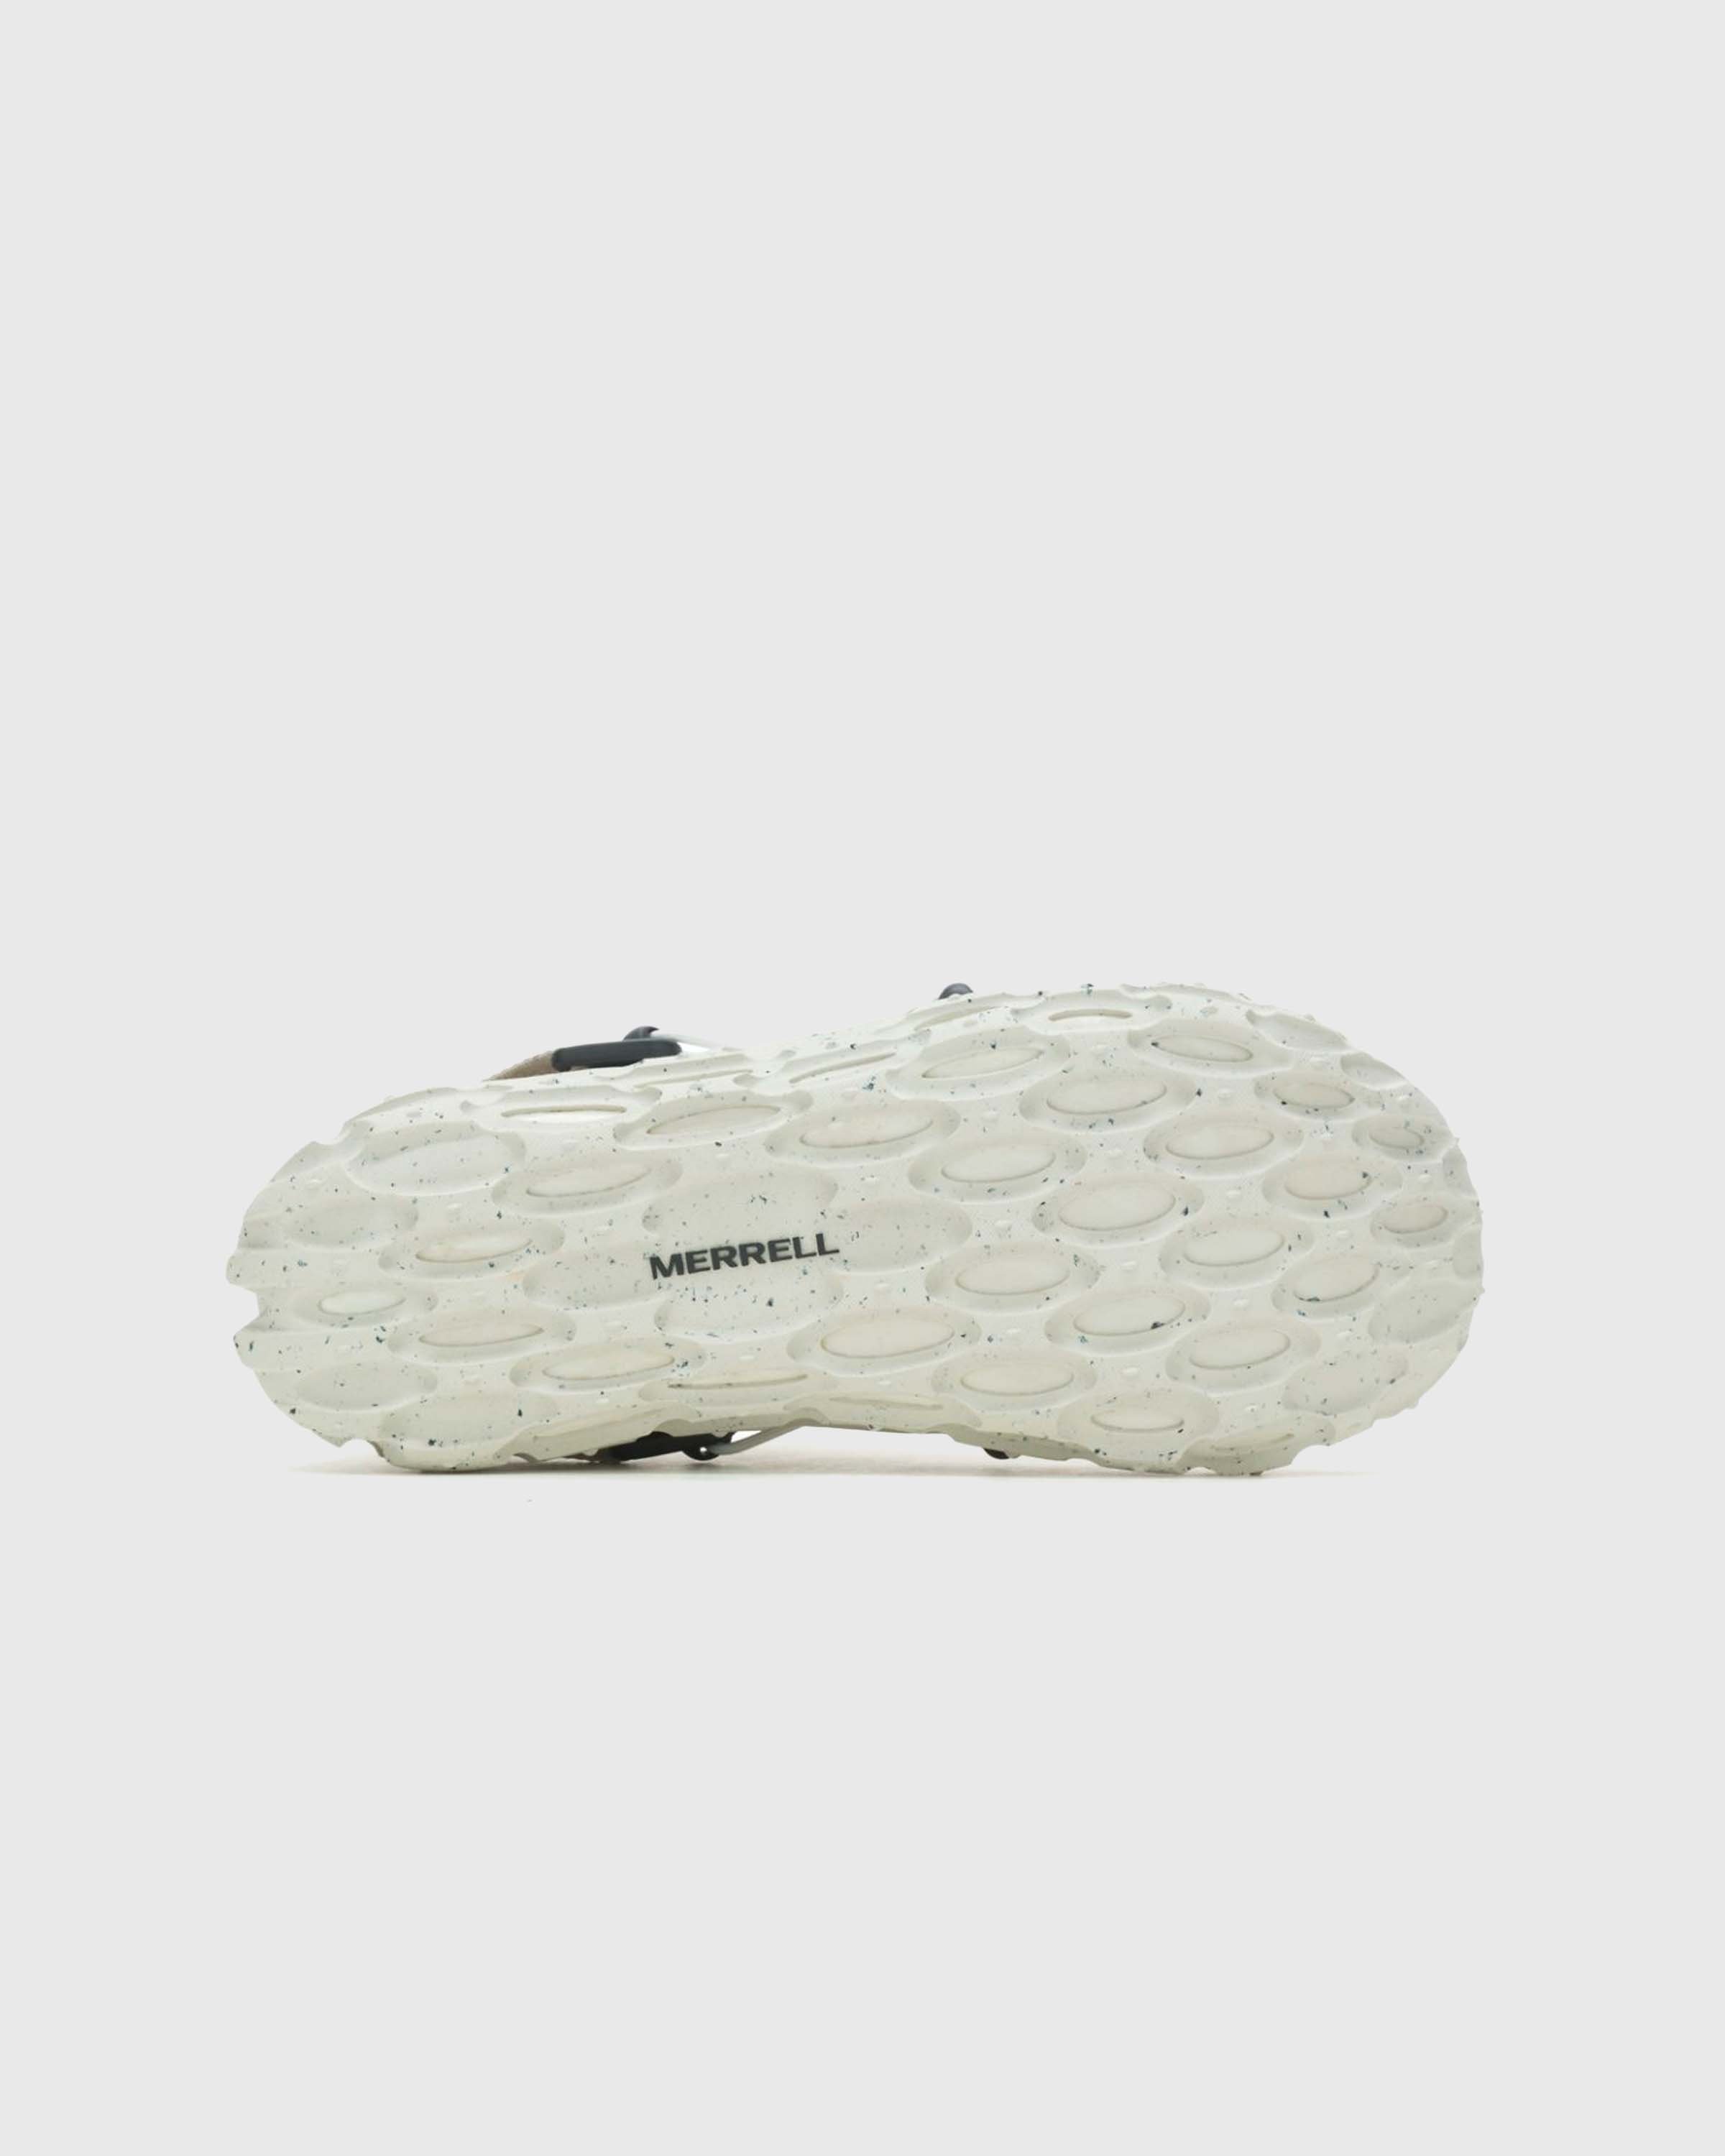 Merrell - Hydro Moc AT Ripstop 1TRL White - Footwear - White - Image 6